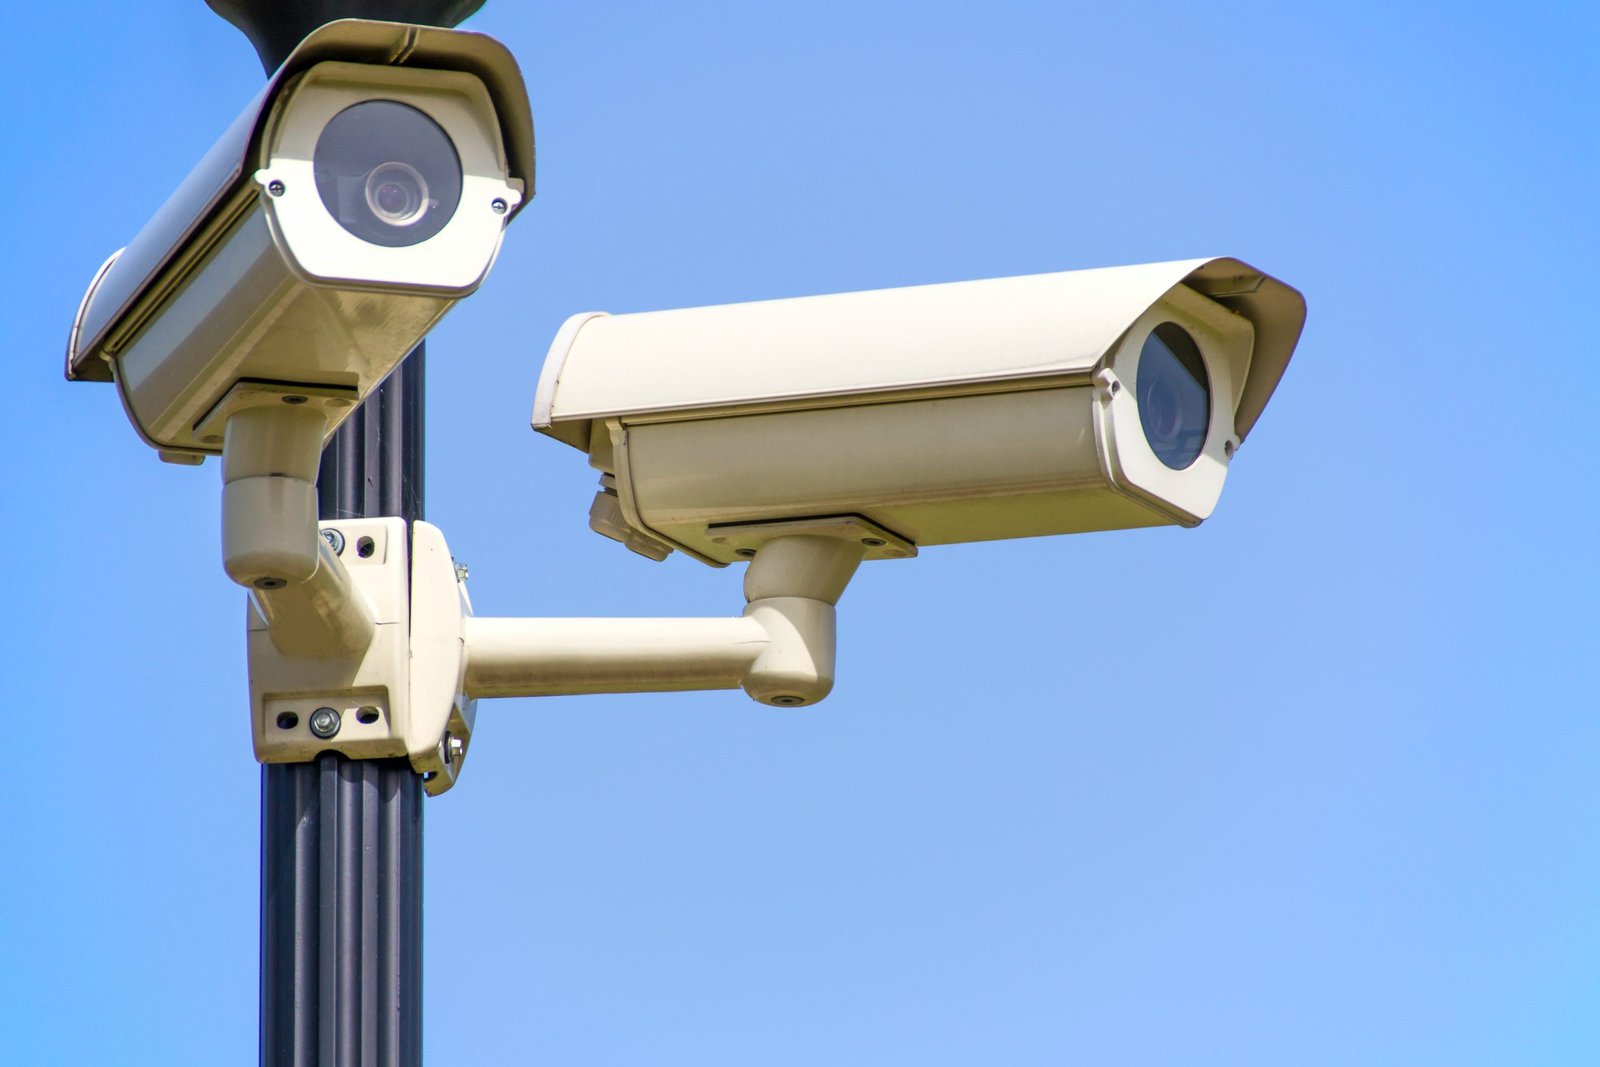 whats the difference between surveillance and spy cameras?